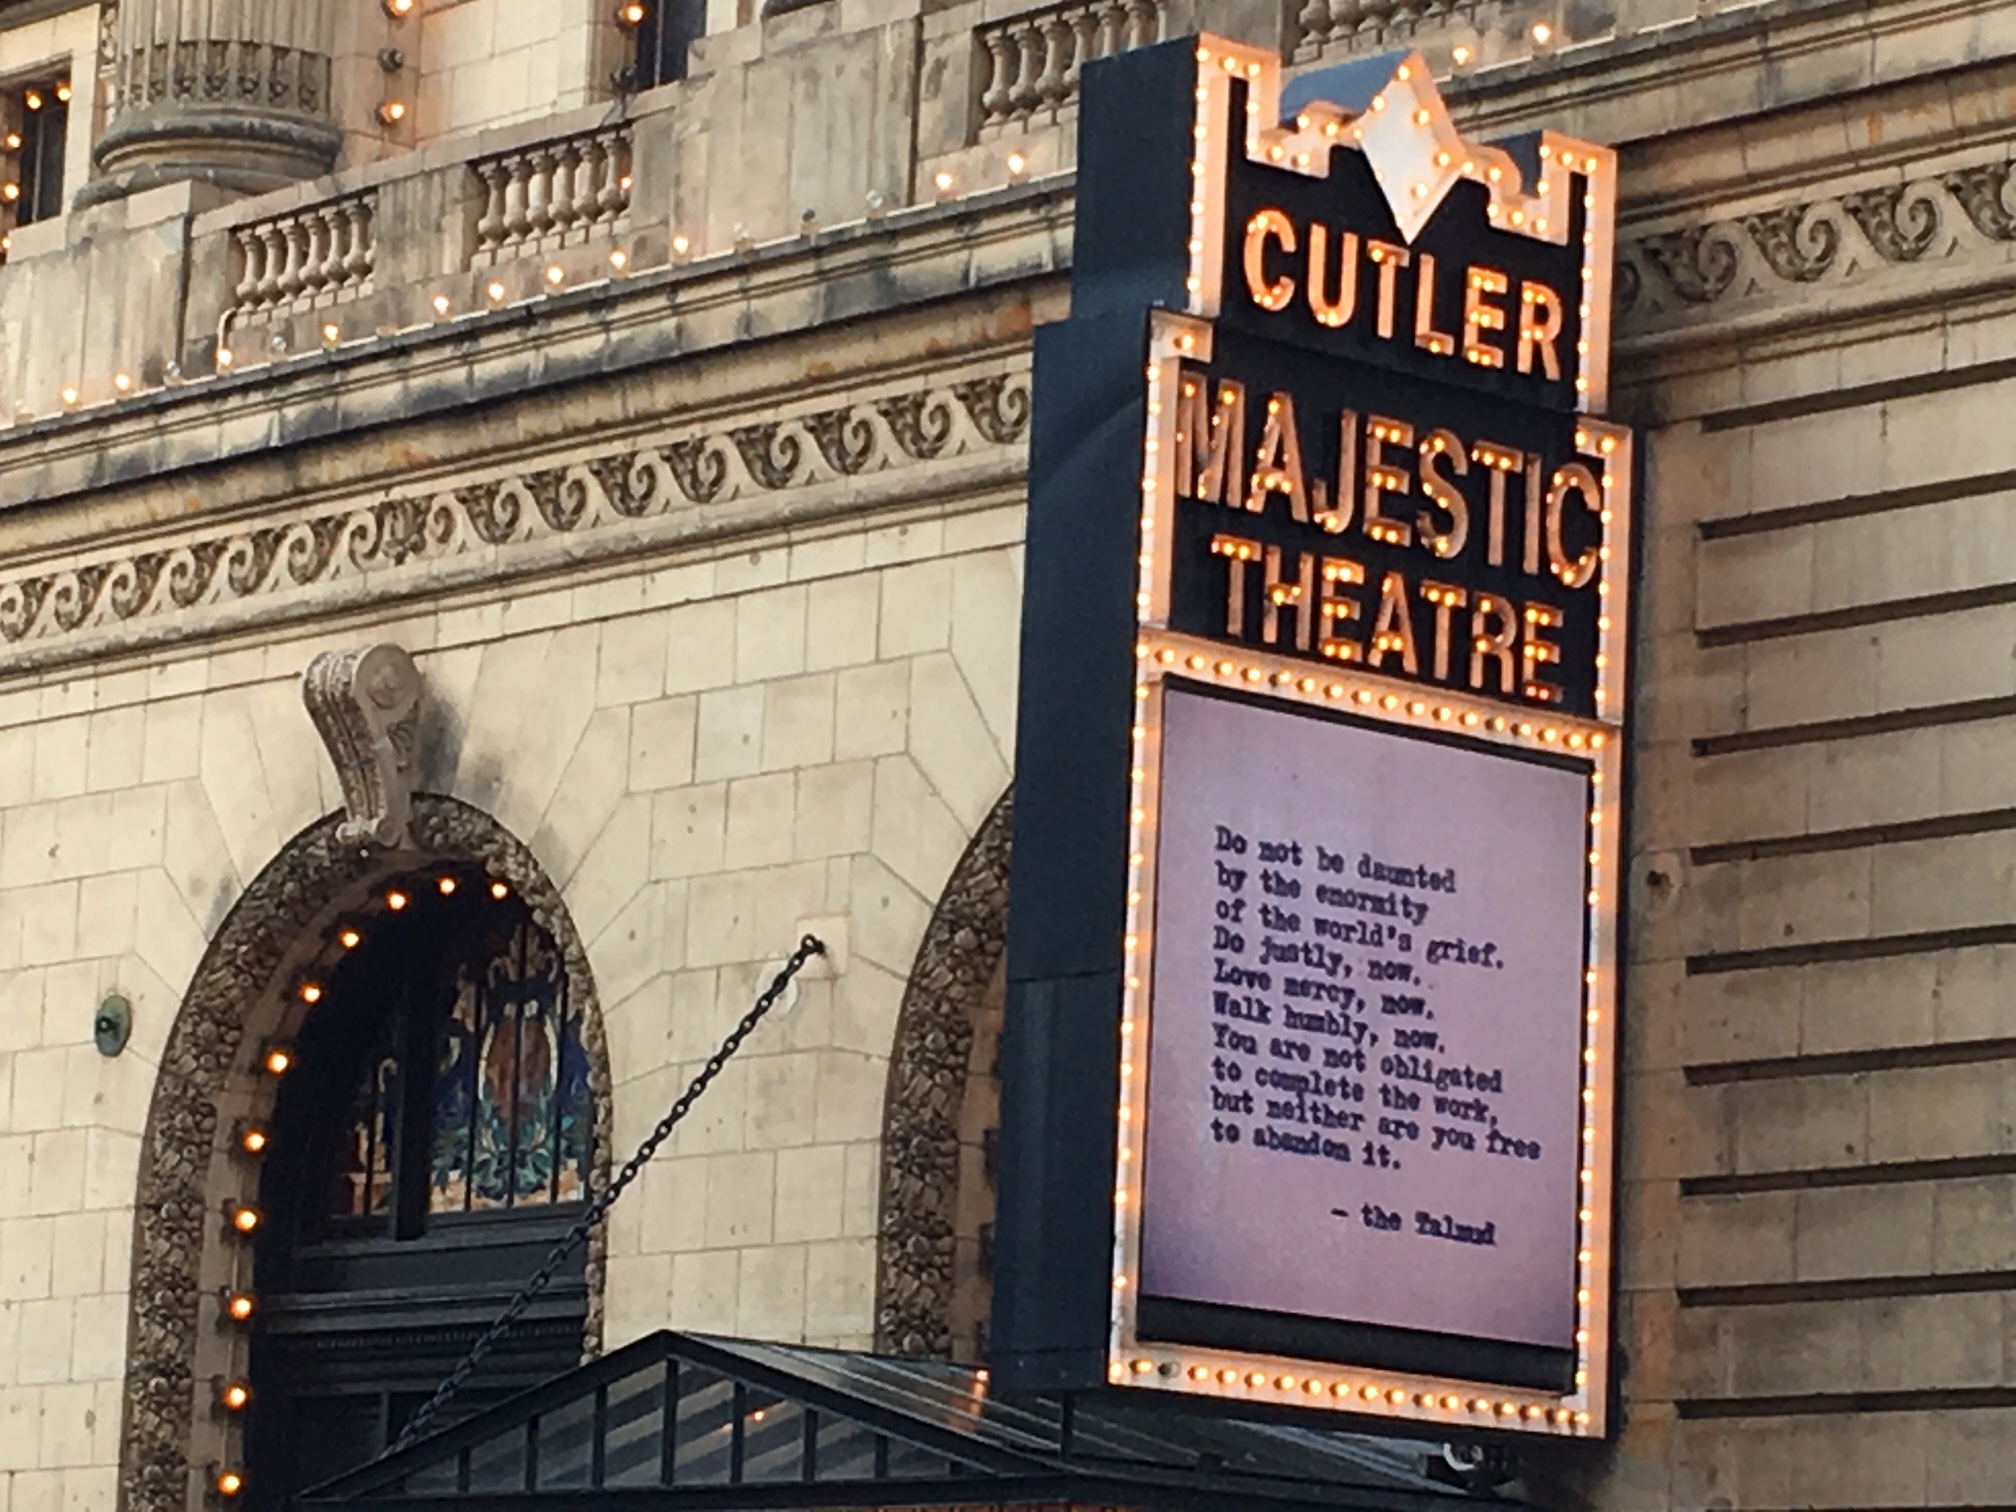 Outside the Cutler Majestic Theatre